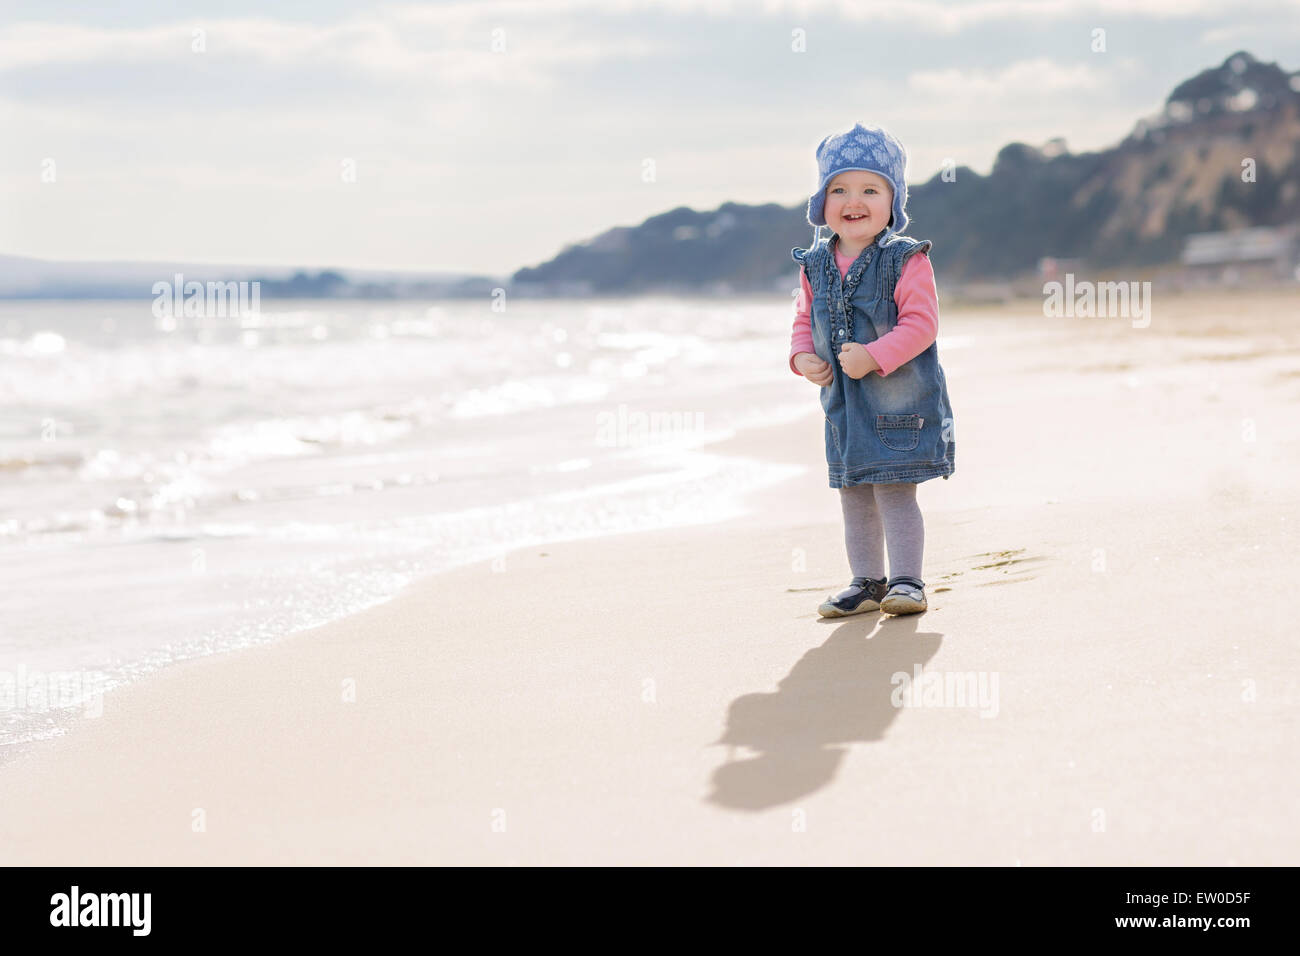 Girl toddler at beach with wearing winter hat Stock Photo